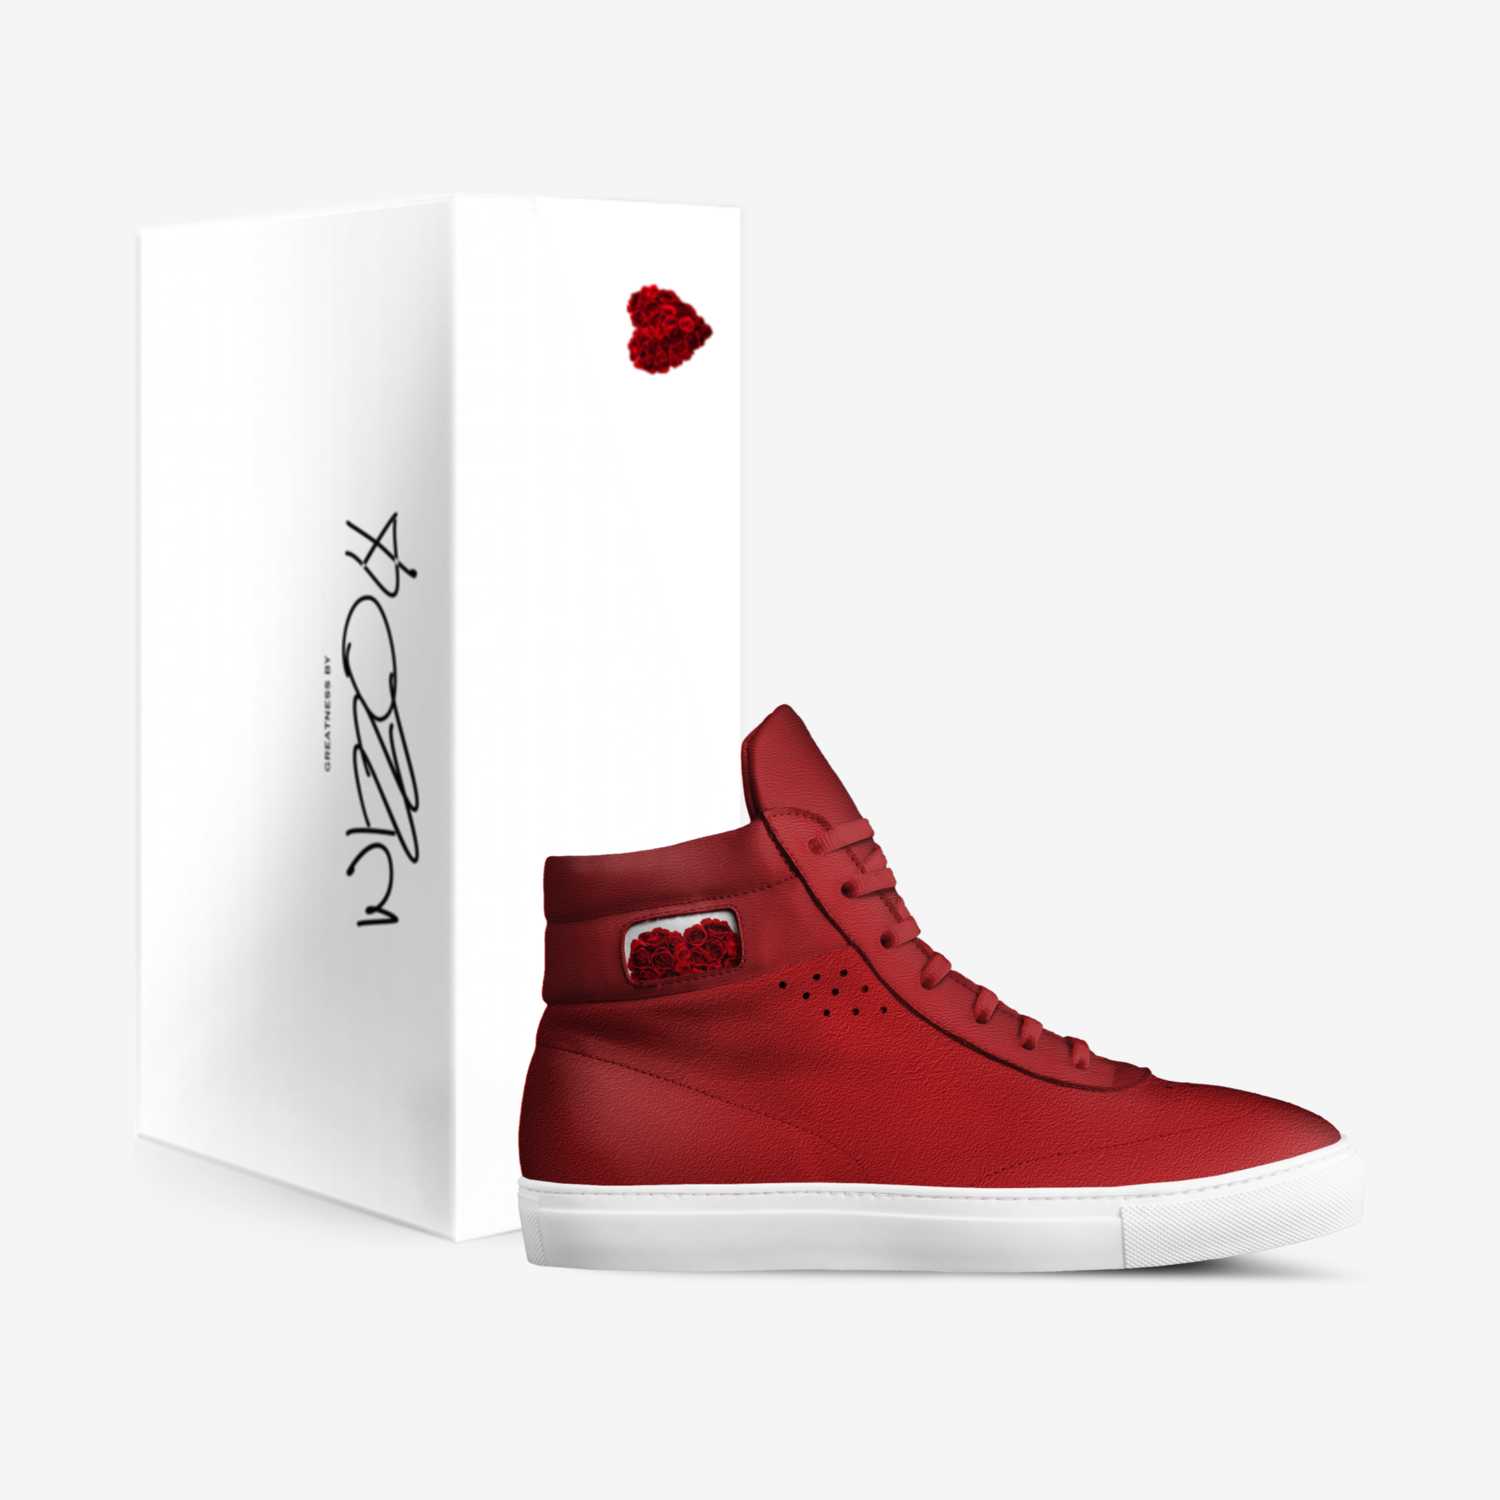 Wizzolx  custom made in Italy shoes by Dante Bulter | Box view